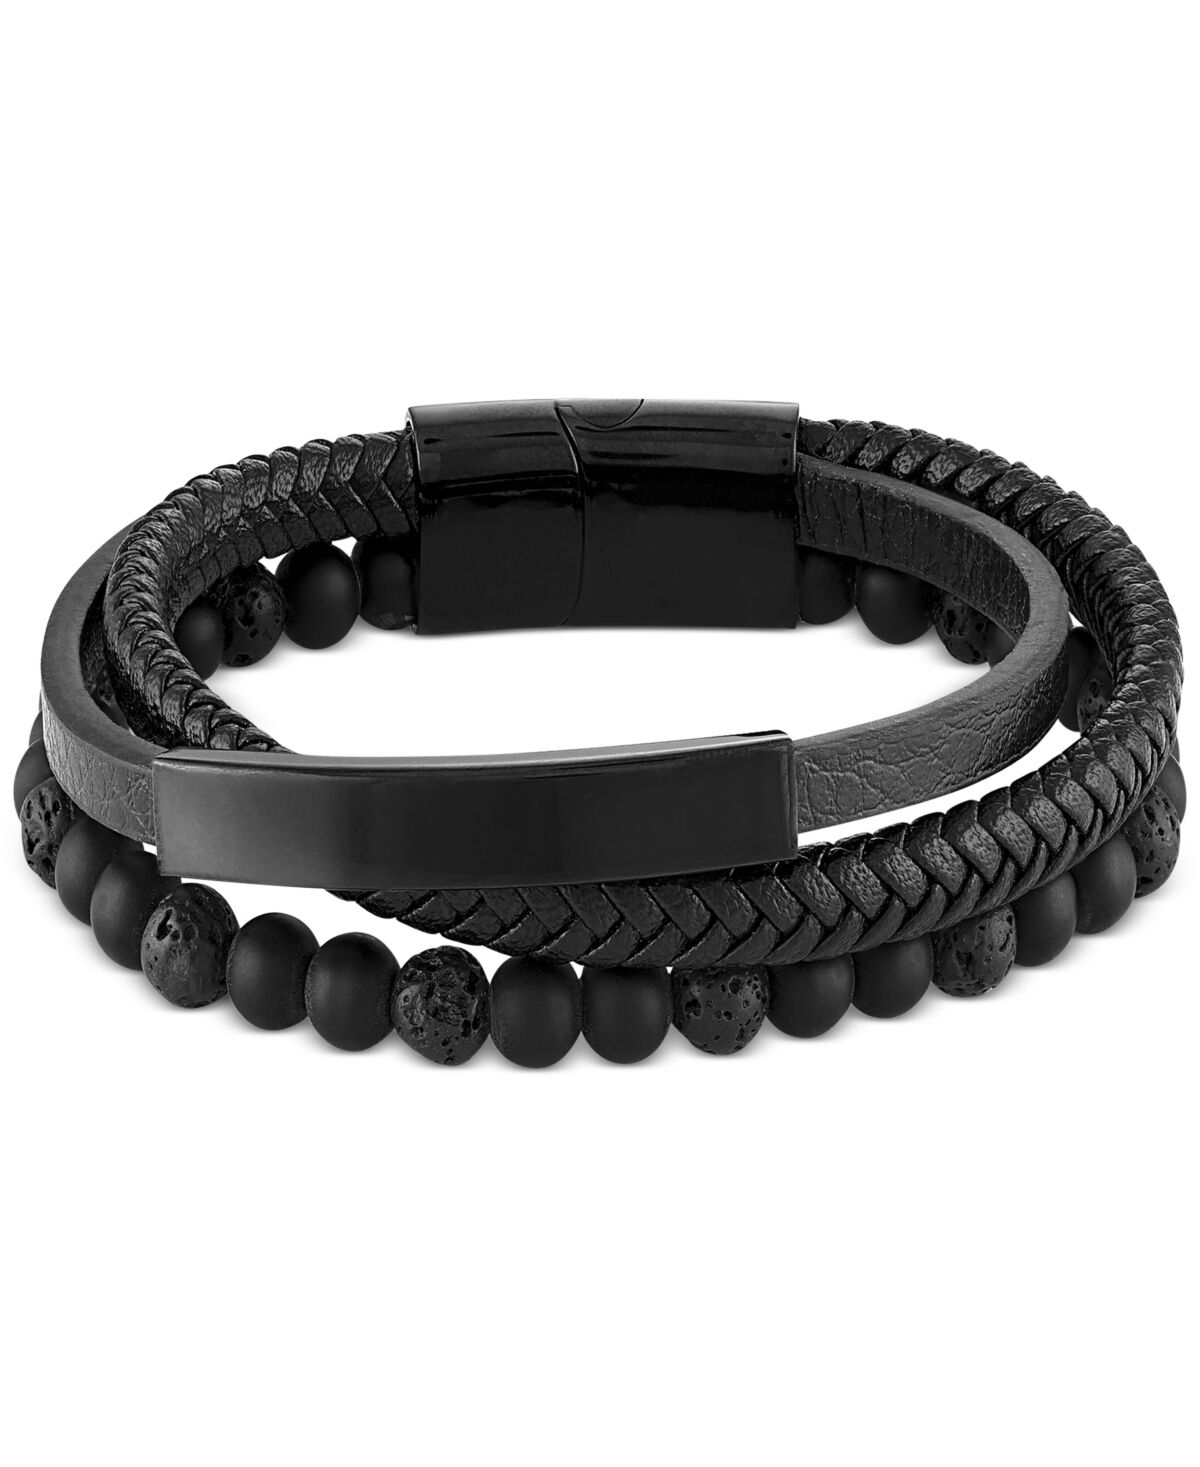 Macy's Men's Onyx & Lava Bead Triple Row Braided Leather Bracelet in Black Ion-Plated Stainless Steel (Also in Onyx/Sodalite) - Black